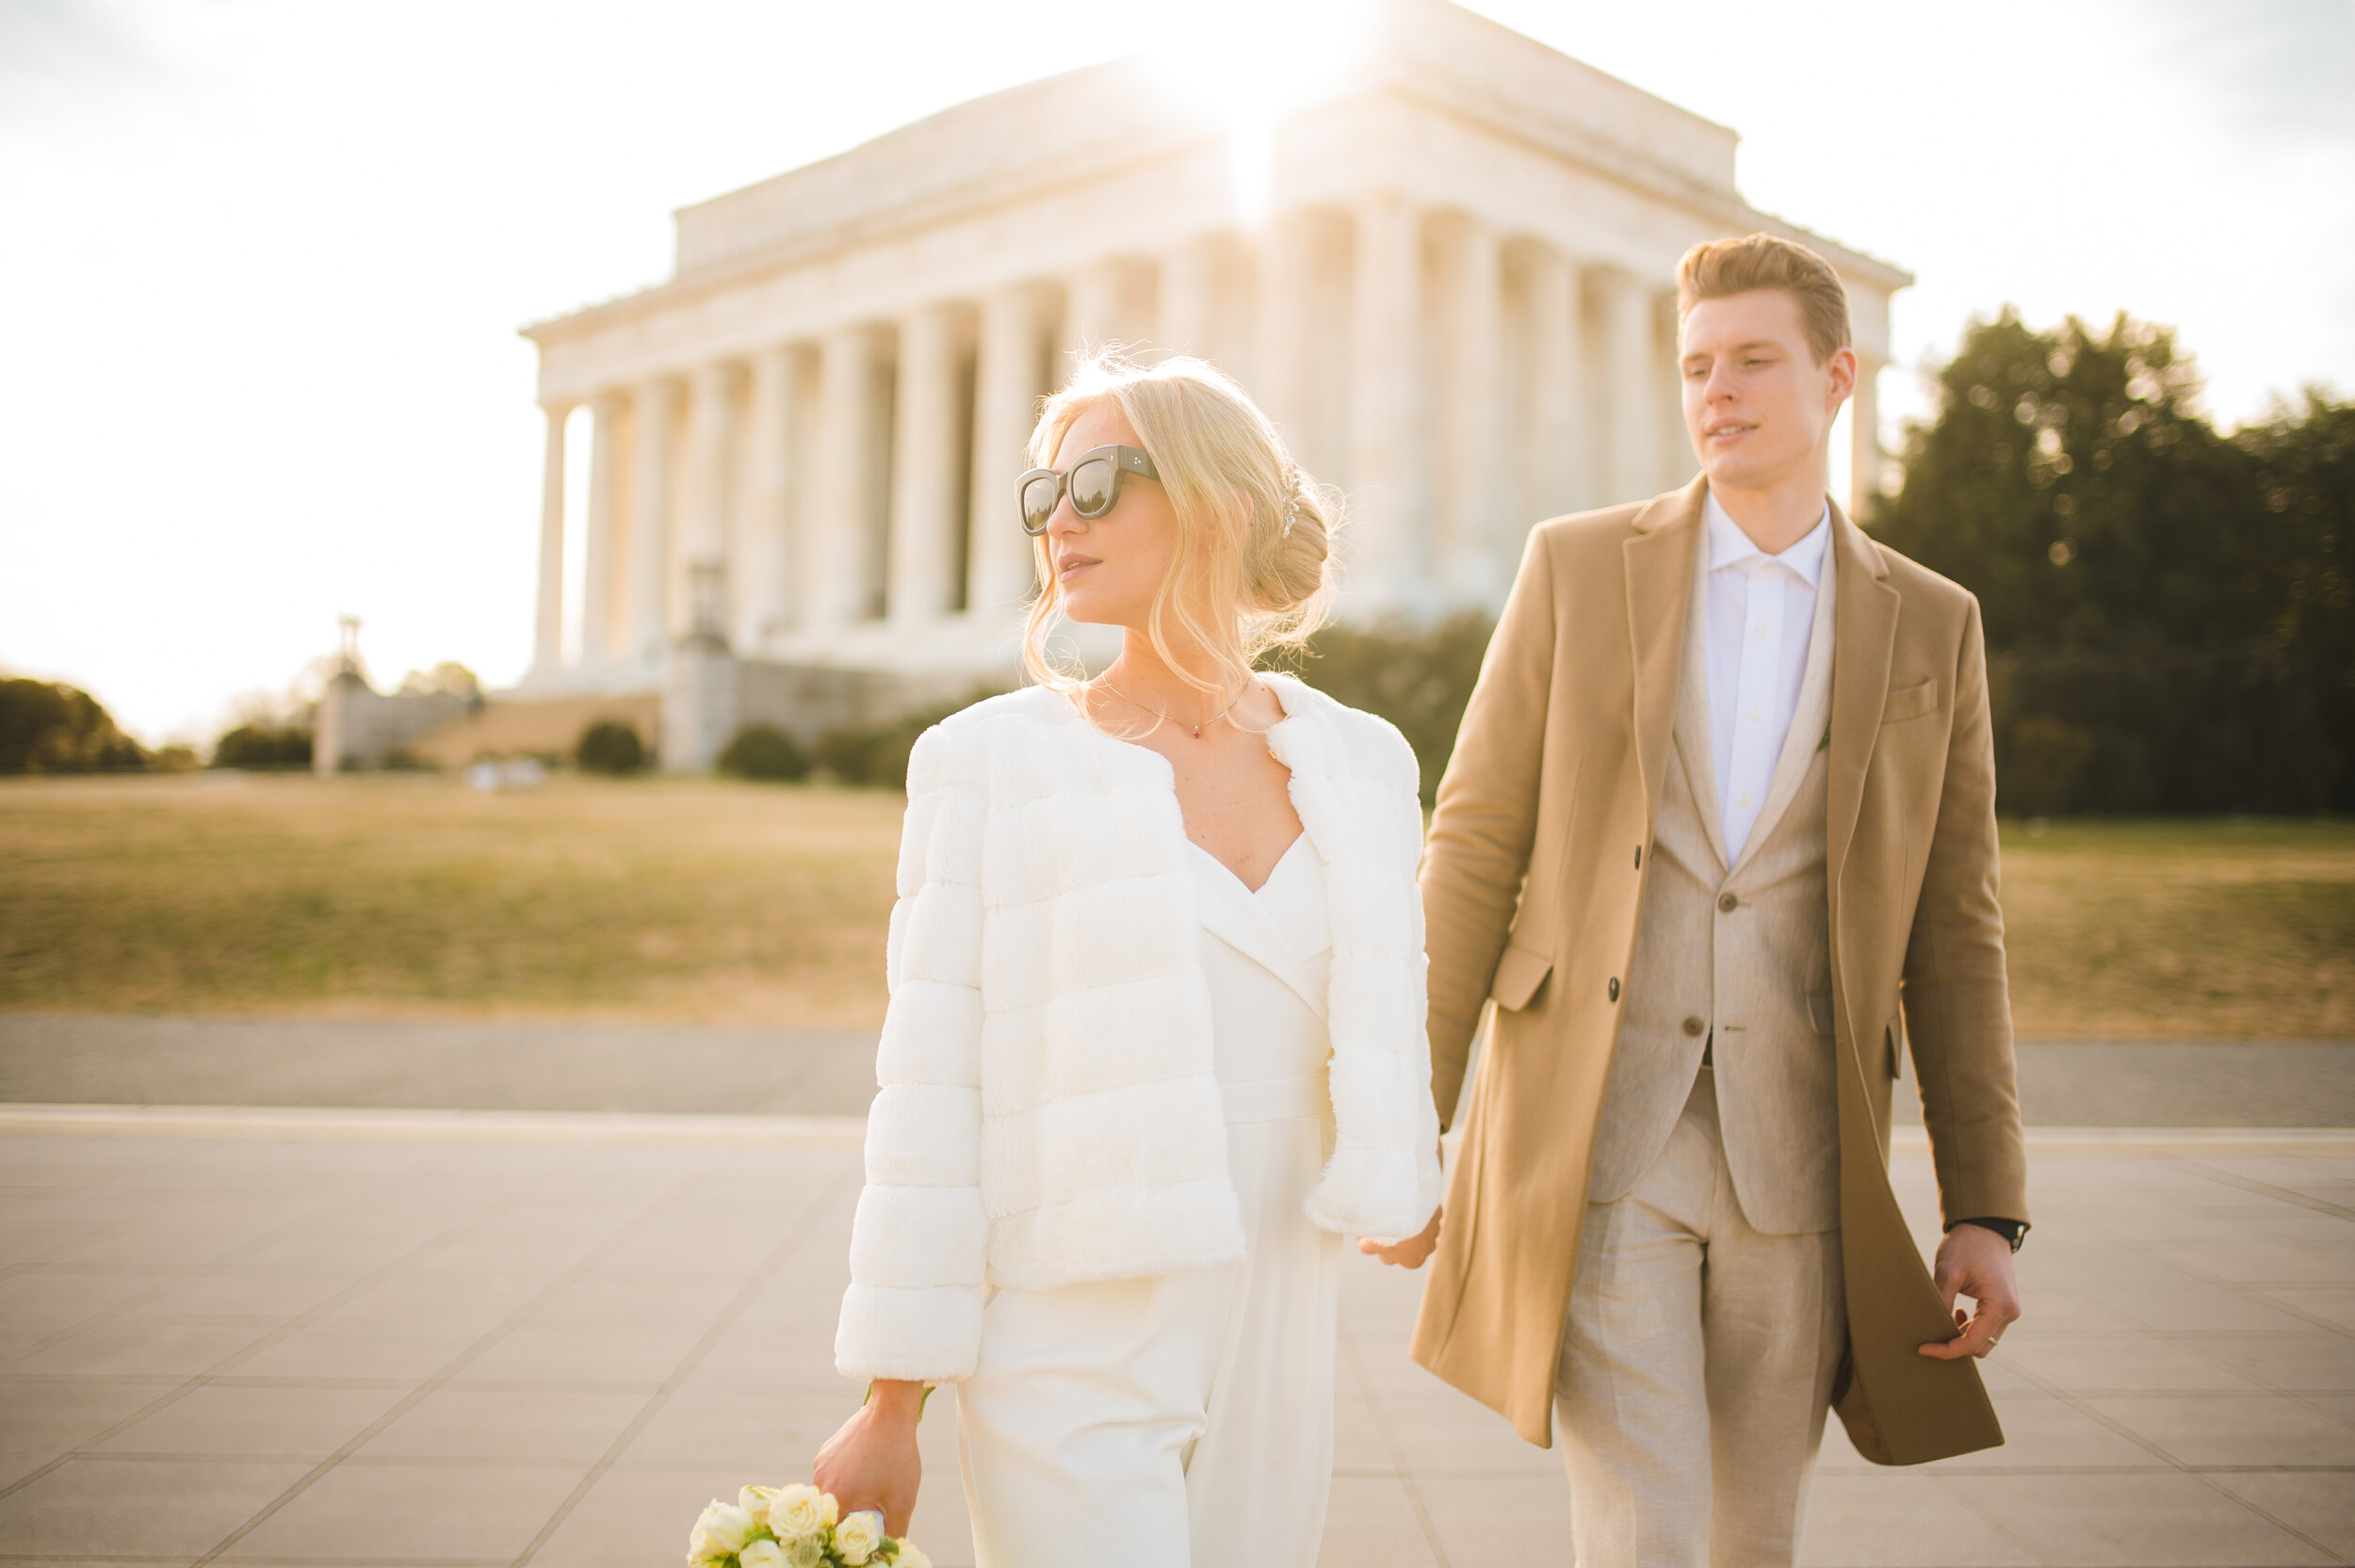 Wedding-at-Lincoln-Memorial-elegant- luxuty-pictures-by-Gabriele-Stonyte-Photography-19.jpg